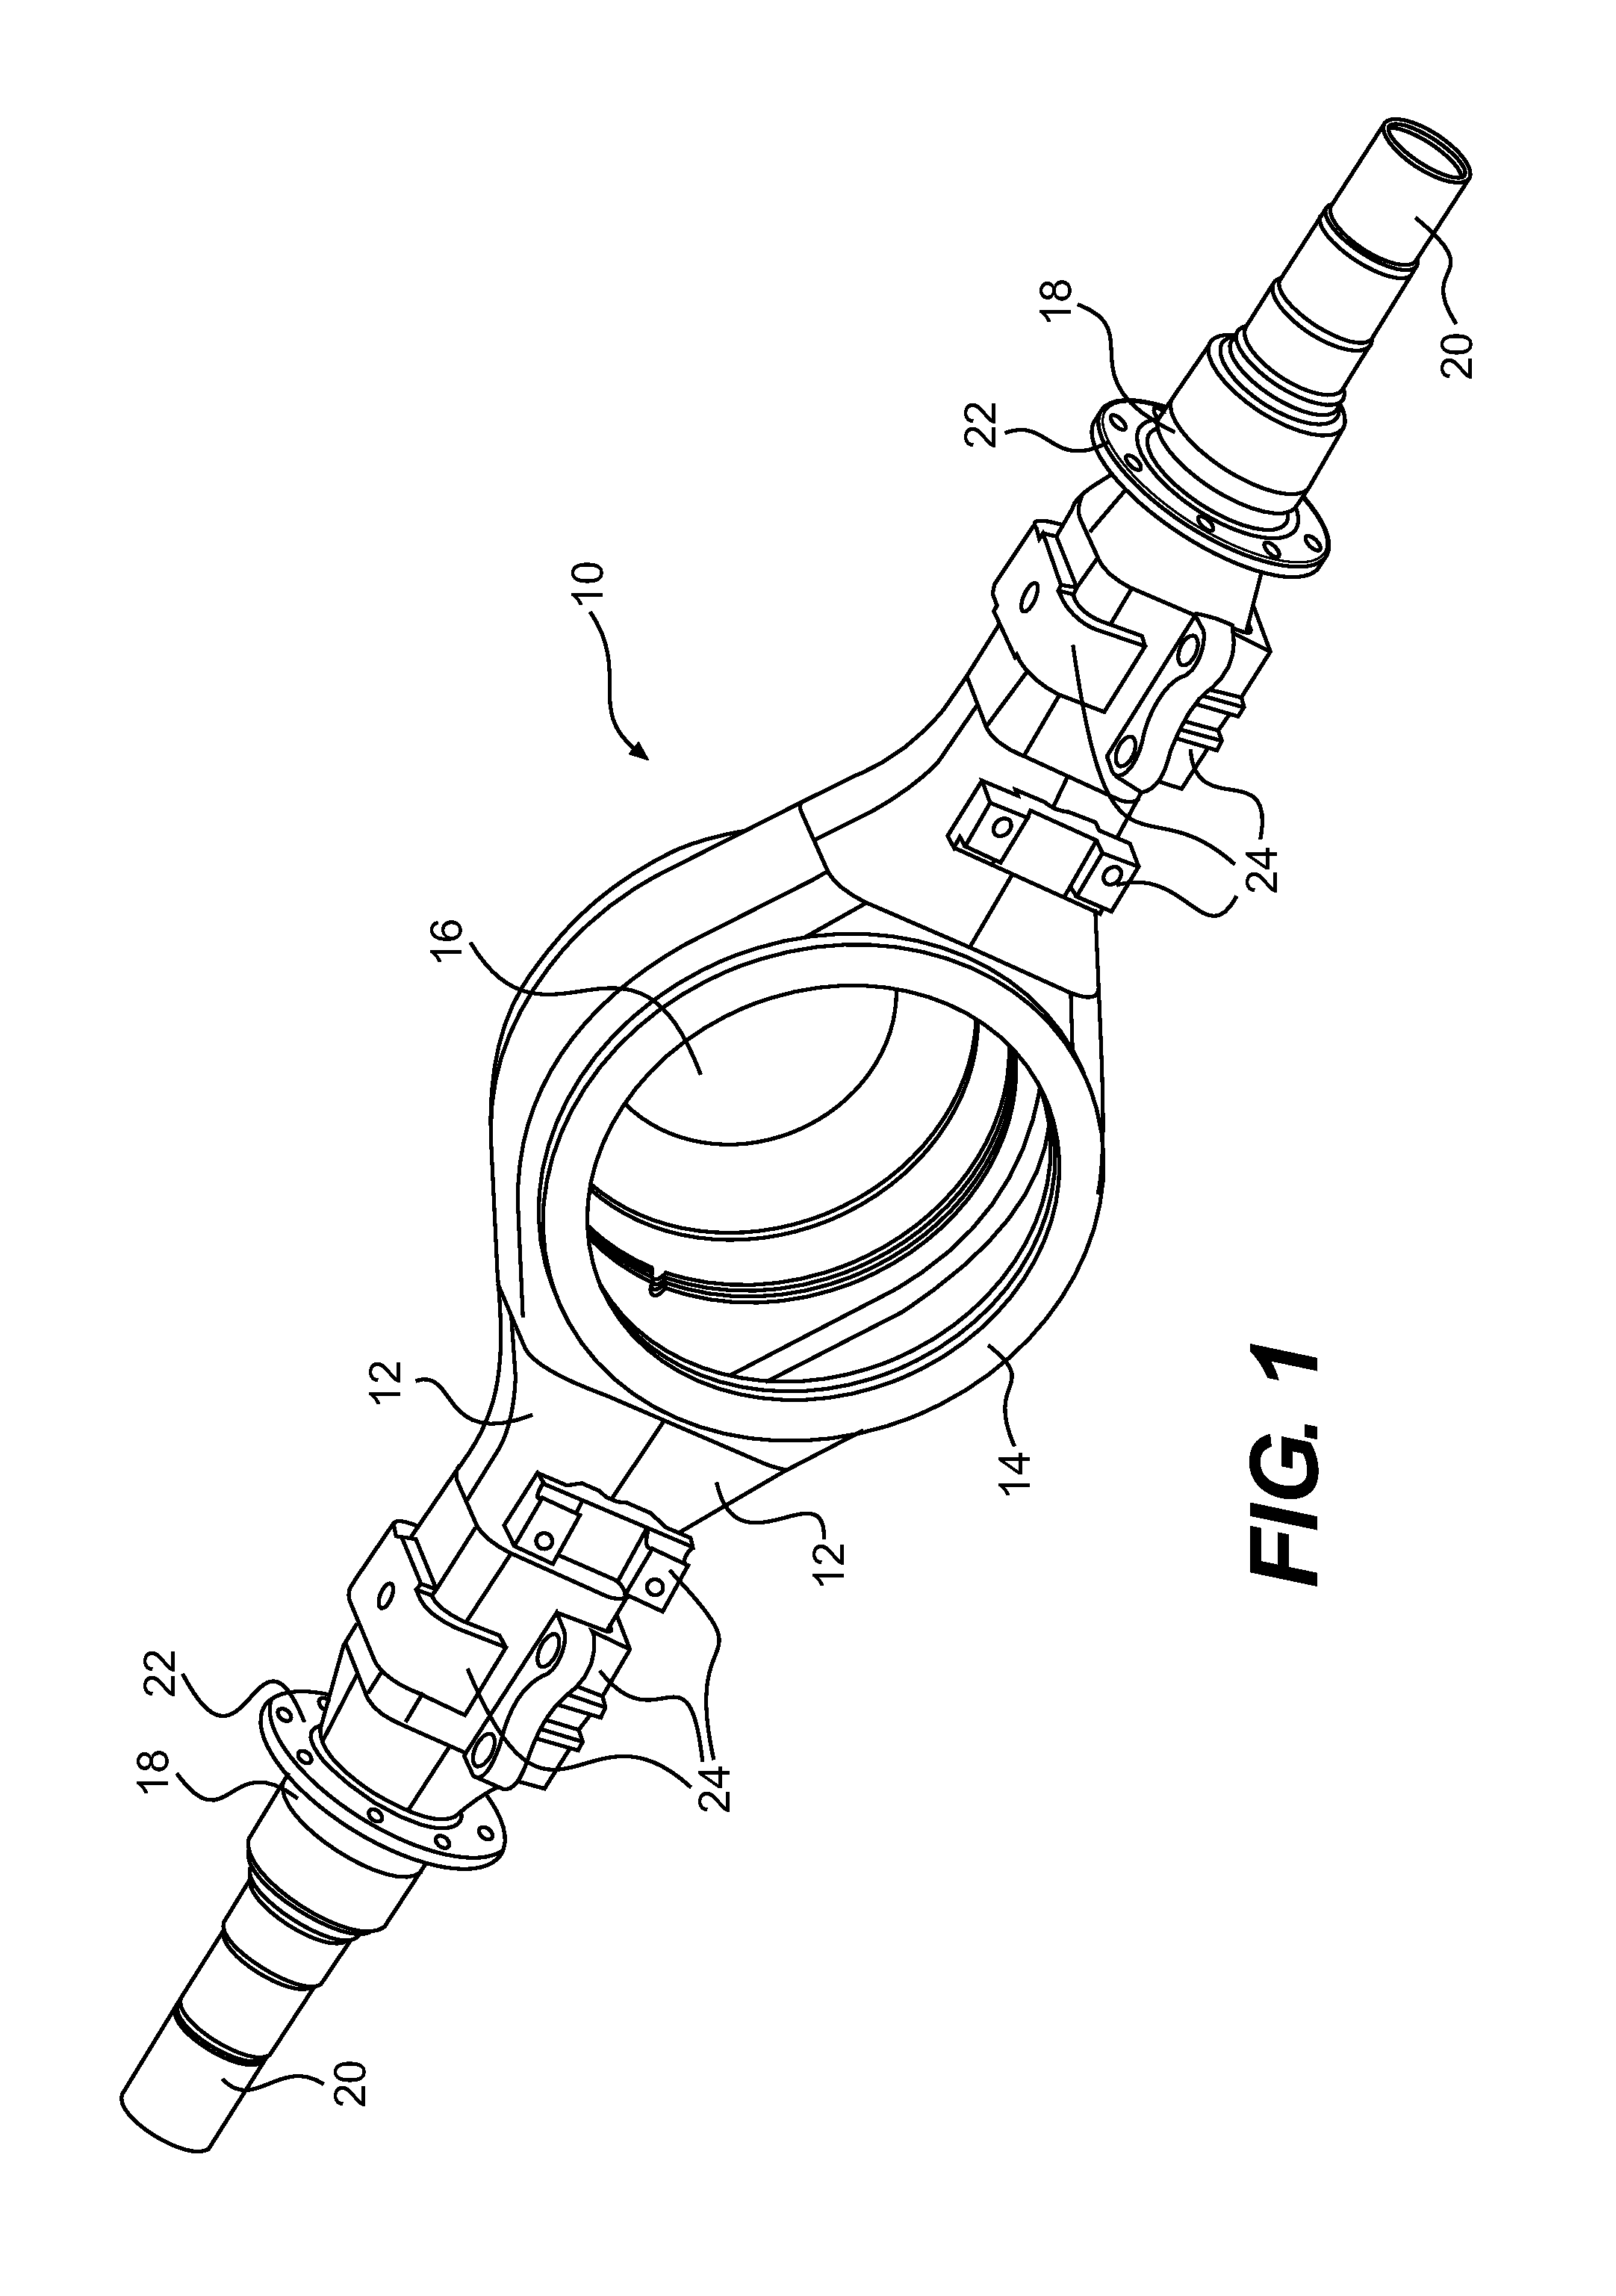 Method and apparatus for manufacturing an axle for a vehicle